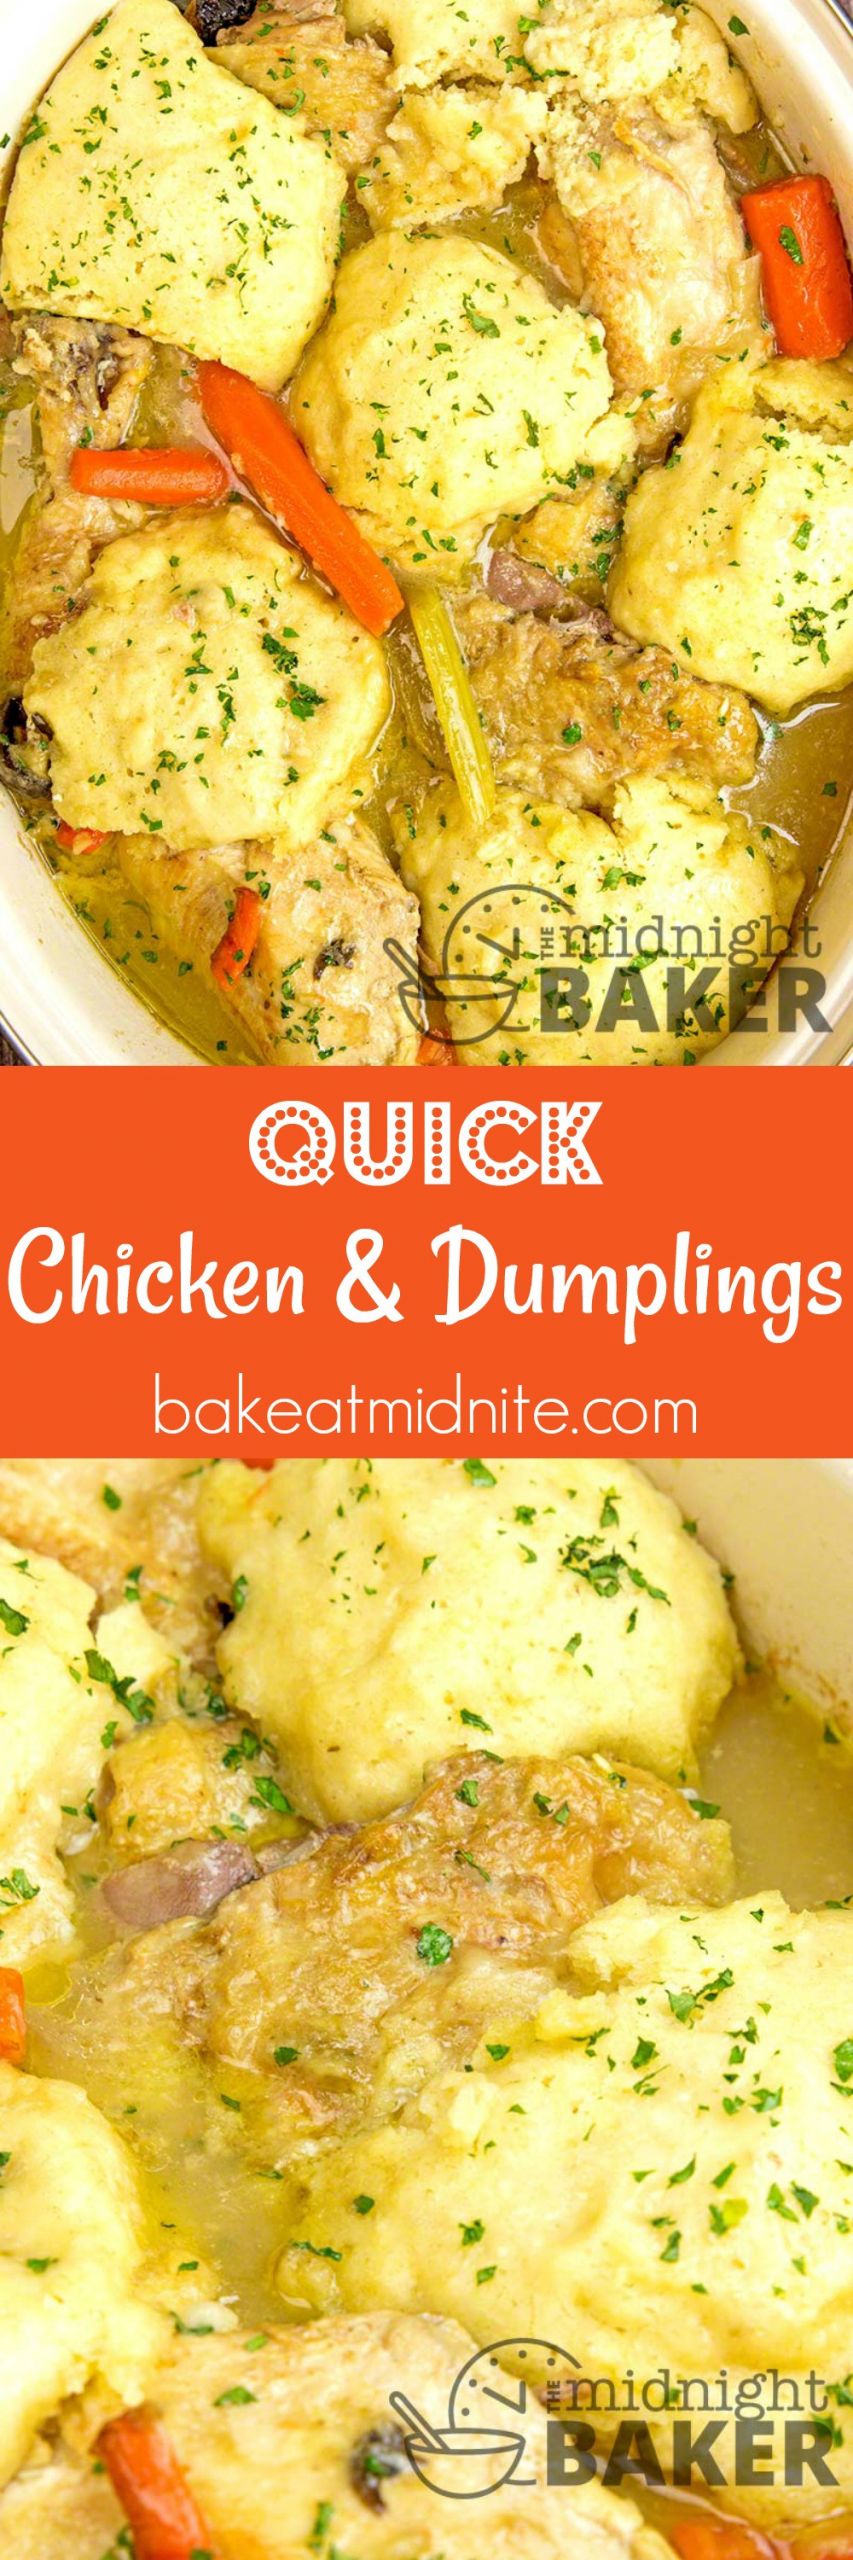 Quick And Easy Chicken And Dumplings
 Quick Chicken And Dumplings The Midnight Baker Fast